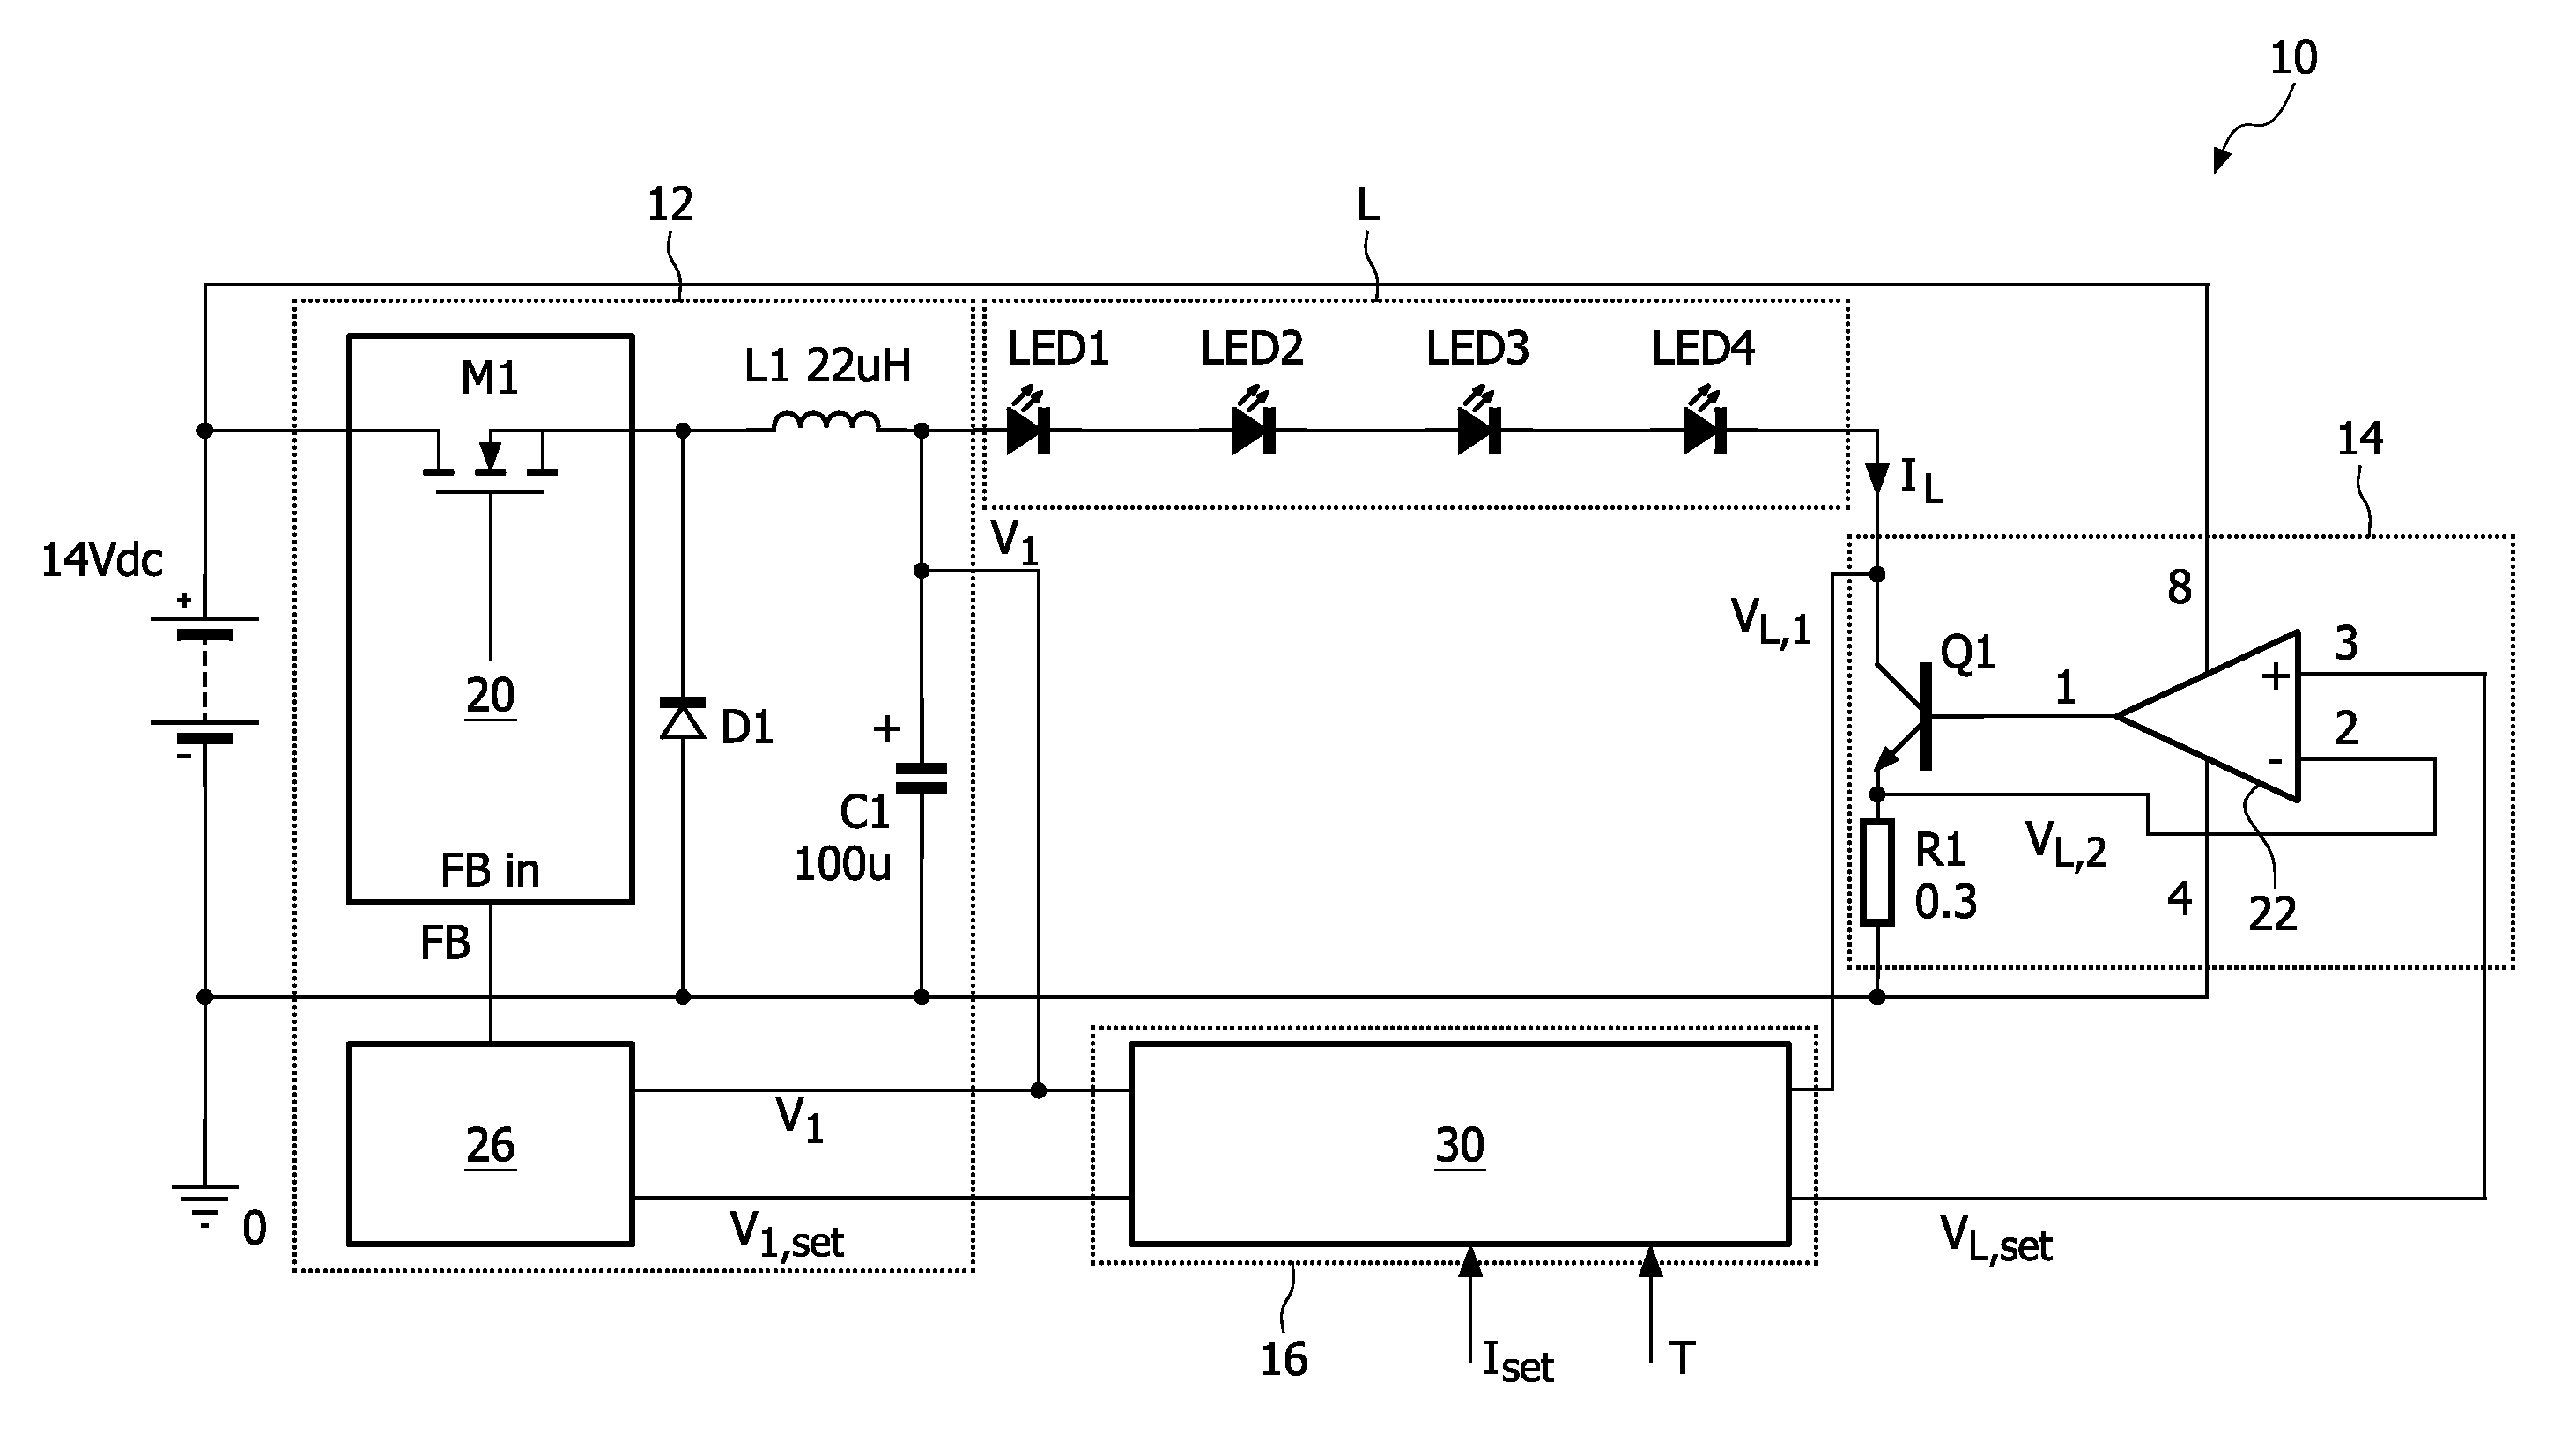 Driver circuit for loads such as led, OLED or laser diodes